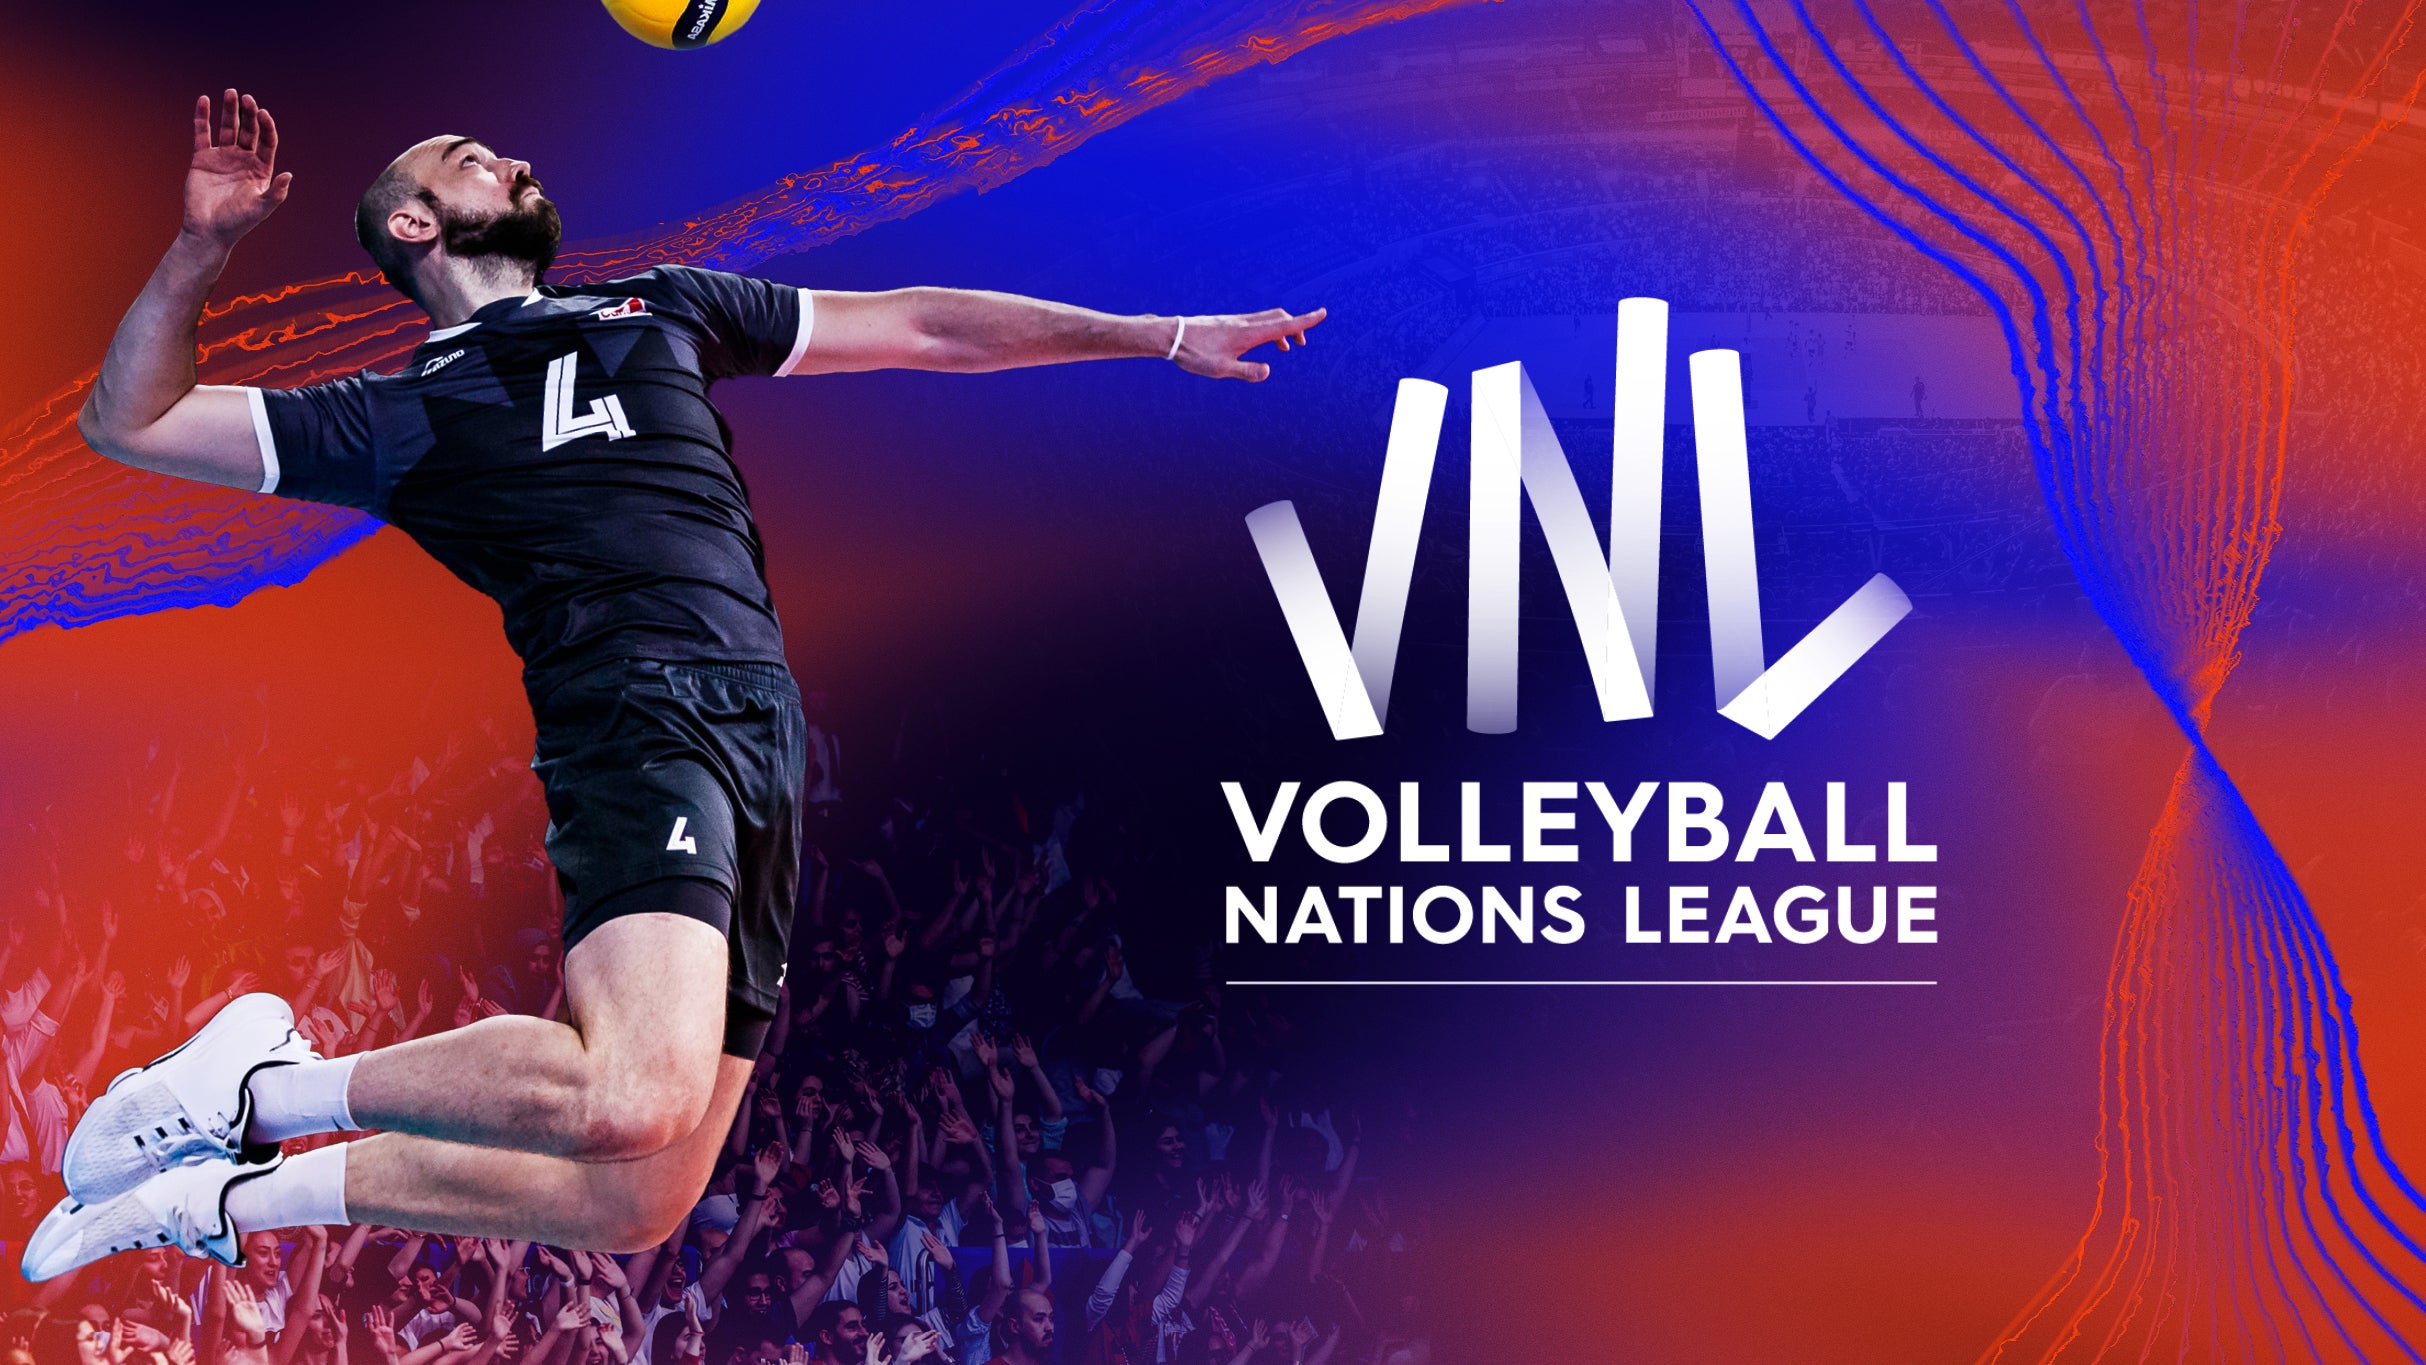 Volleyball Nations League - June 11 in Ottawa promo photo for Obstructed View presale offer code